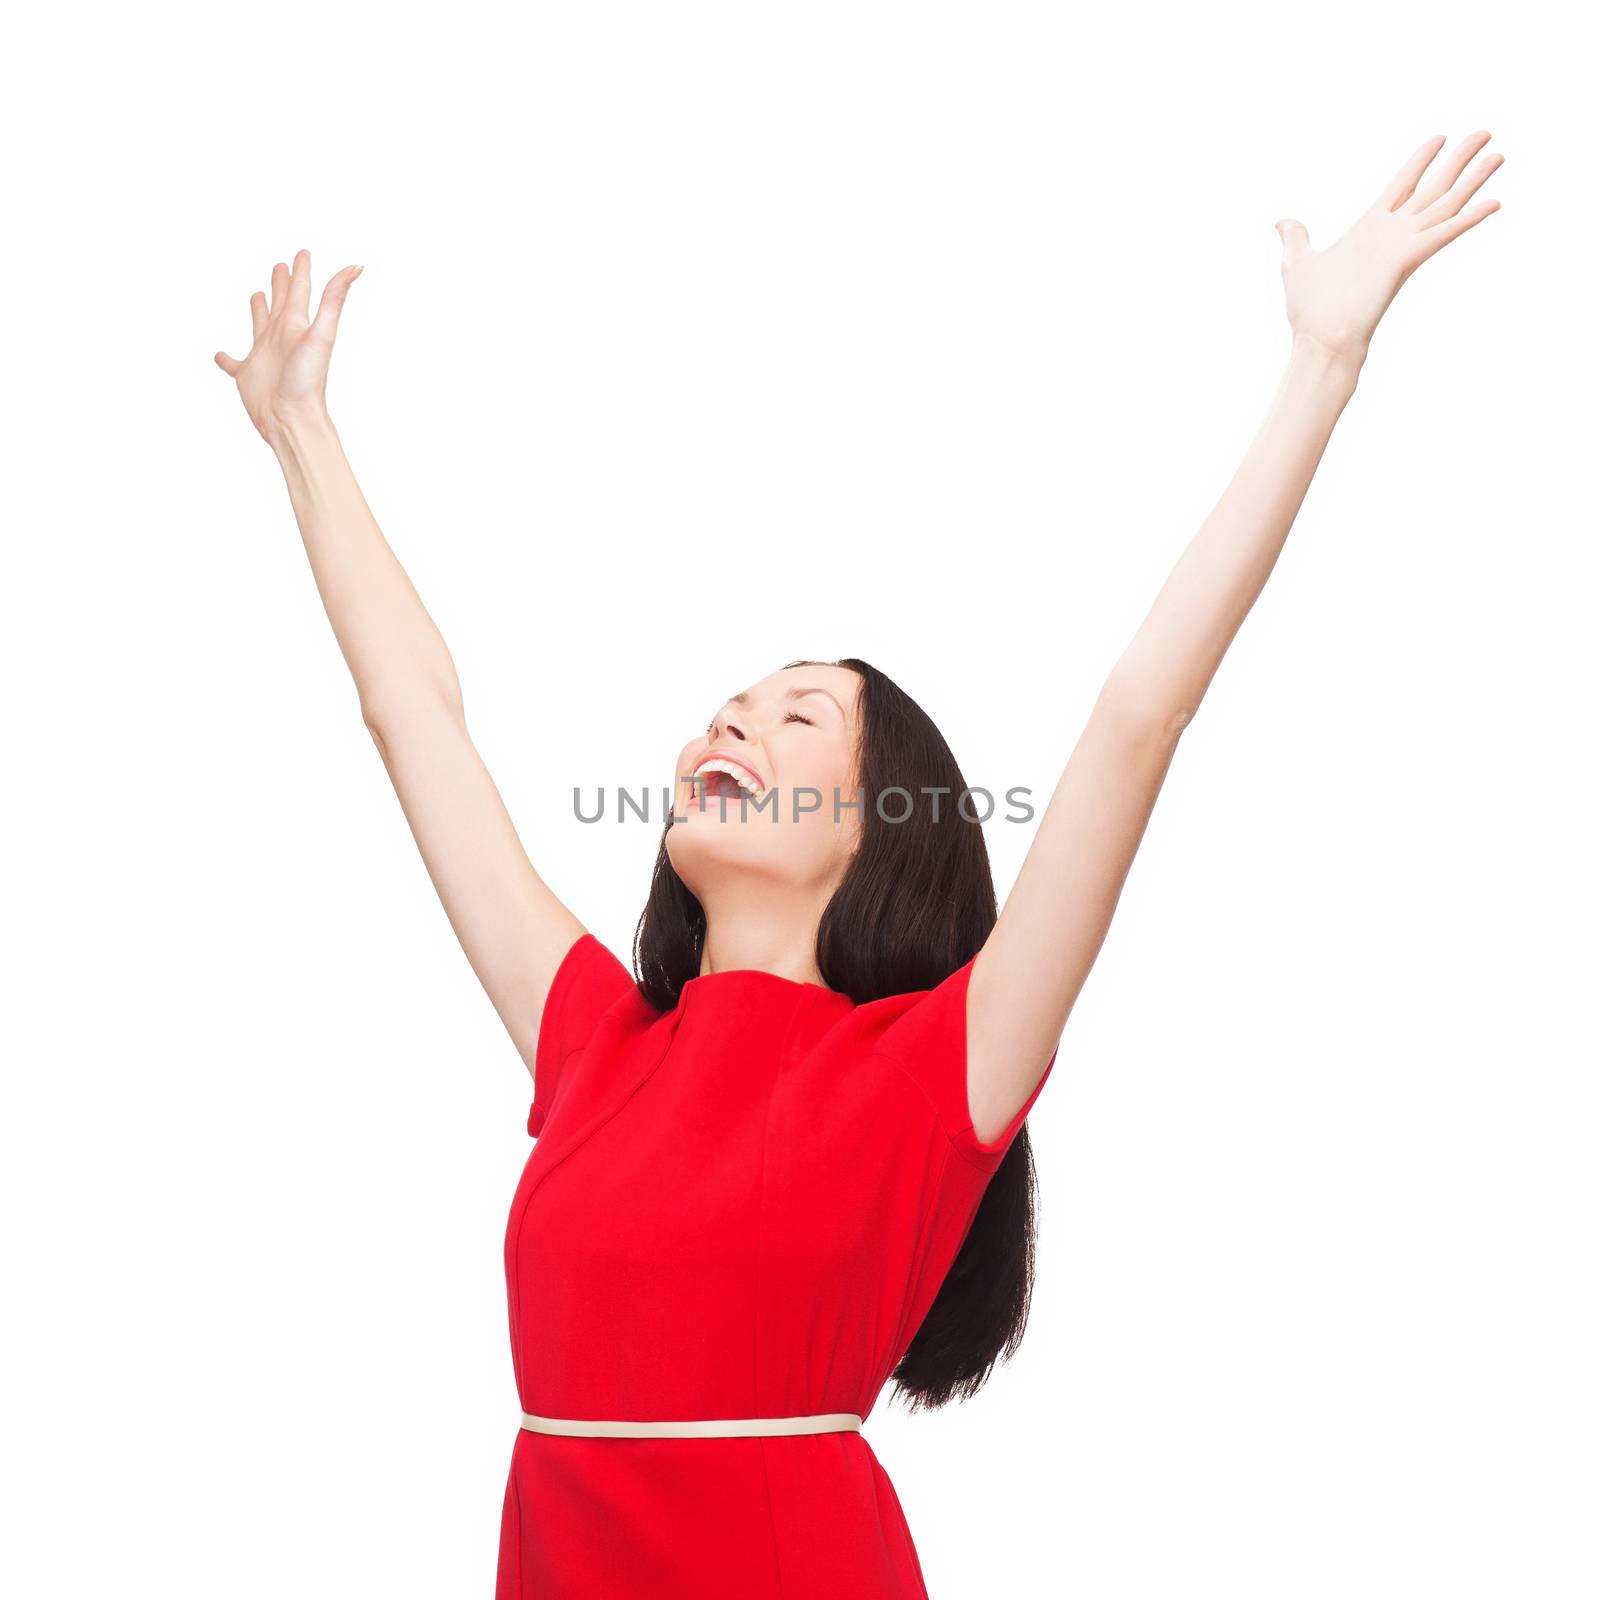 happiness and people concept - smiling young woman in red dress waving hands with closed eyes